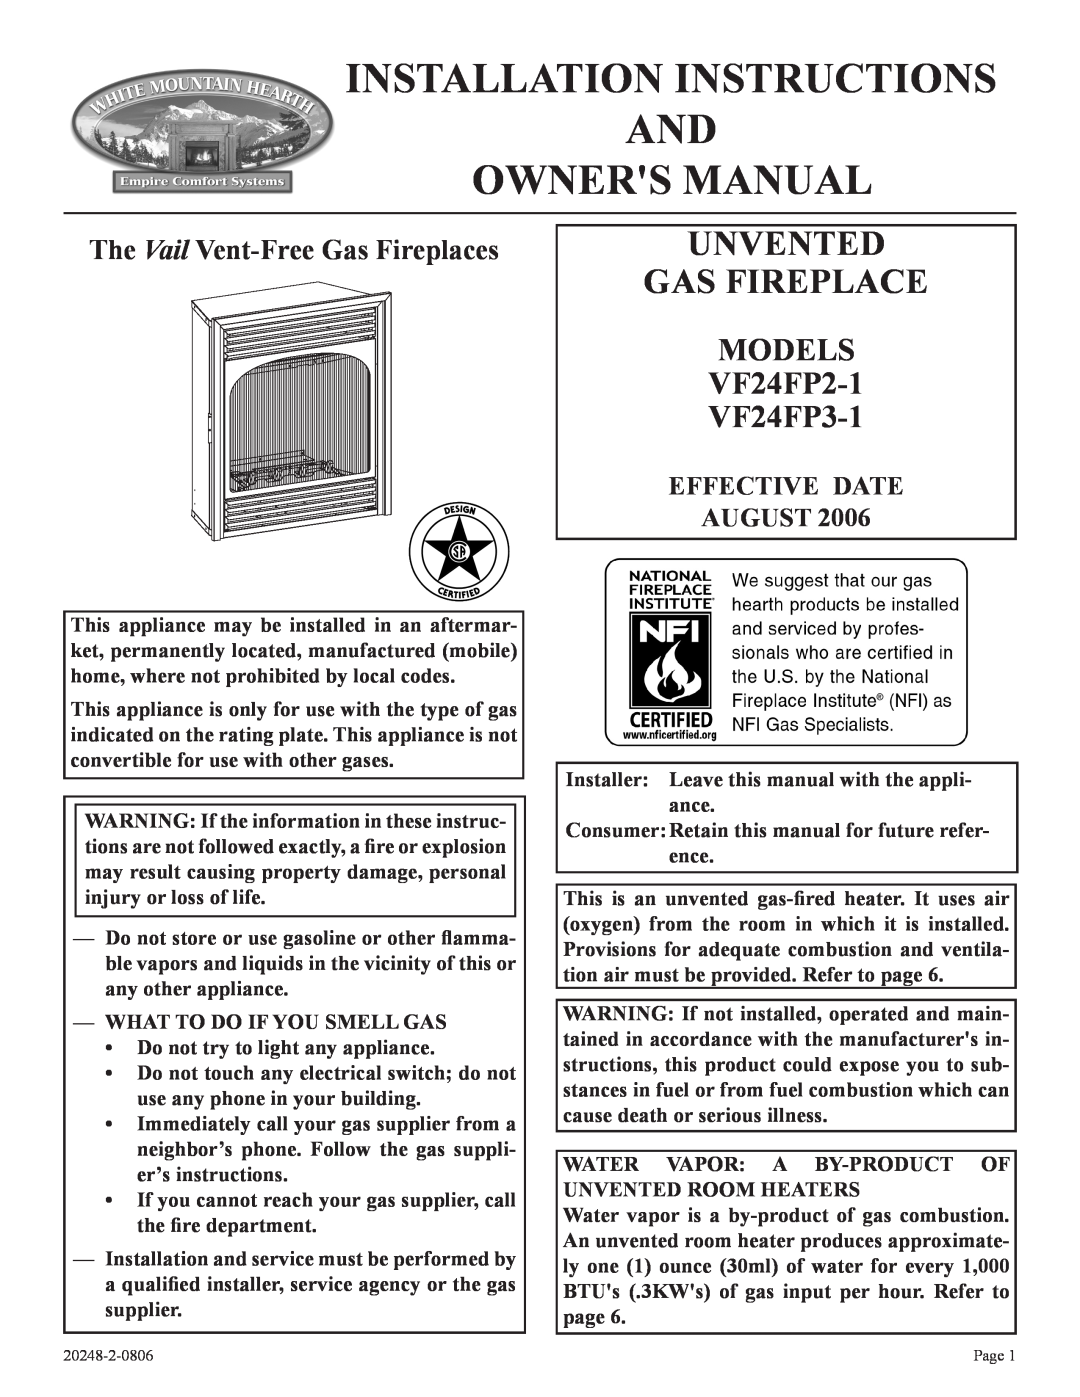 Empire Comfort Systems installation instructions MODELS VF24FP2-1 VF24FP3-1, Effective Date August 